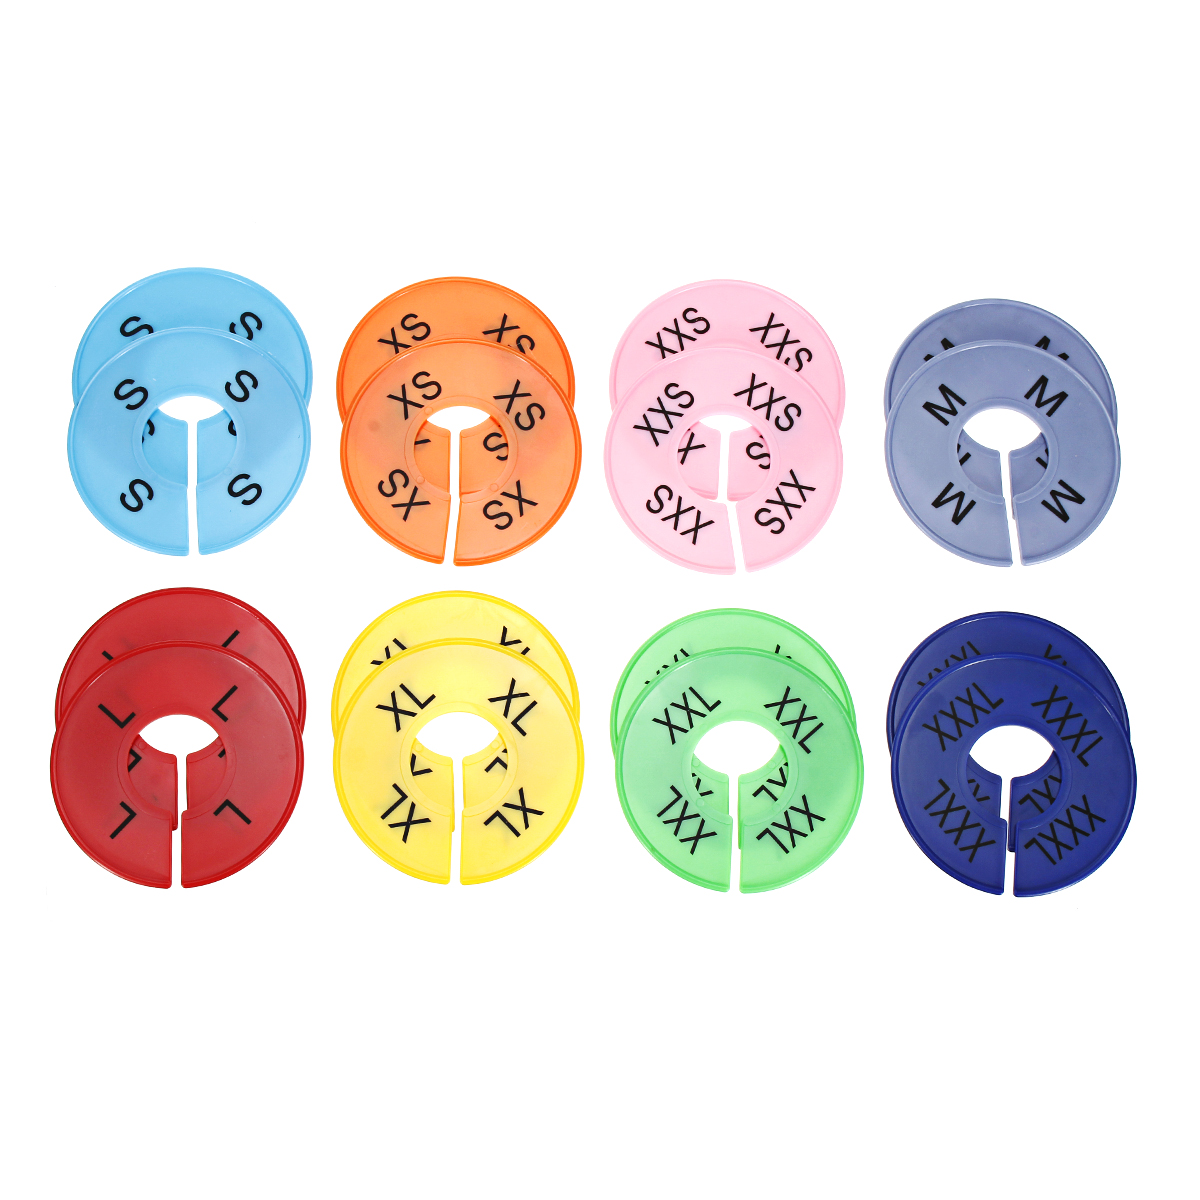 

16Pcs Lot Plastic DIY Cloth Size Dividers Round Hanger Closet Dividers for Clothes Stores or Home Dividers